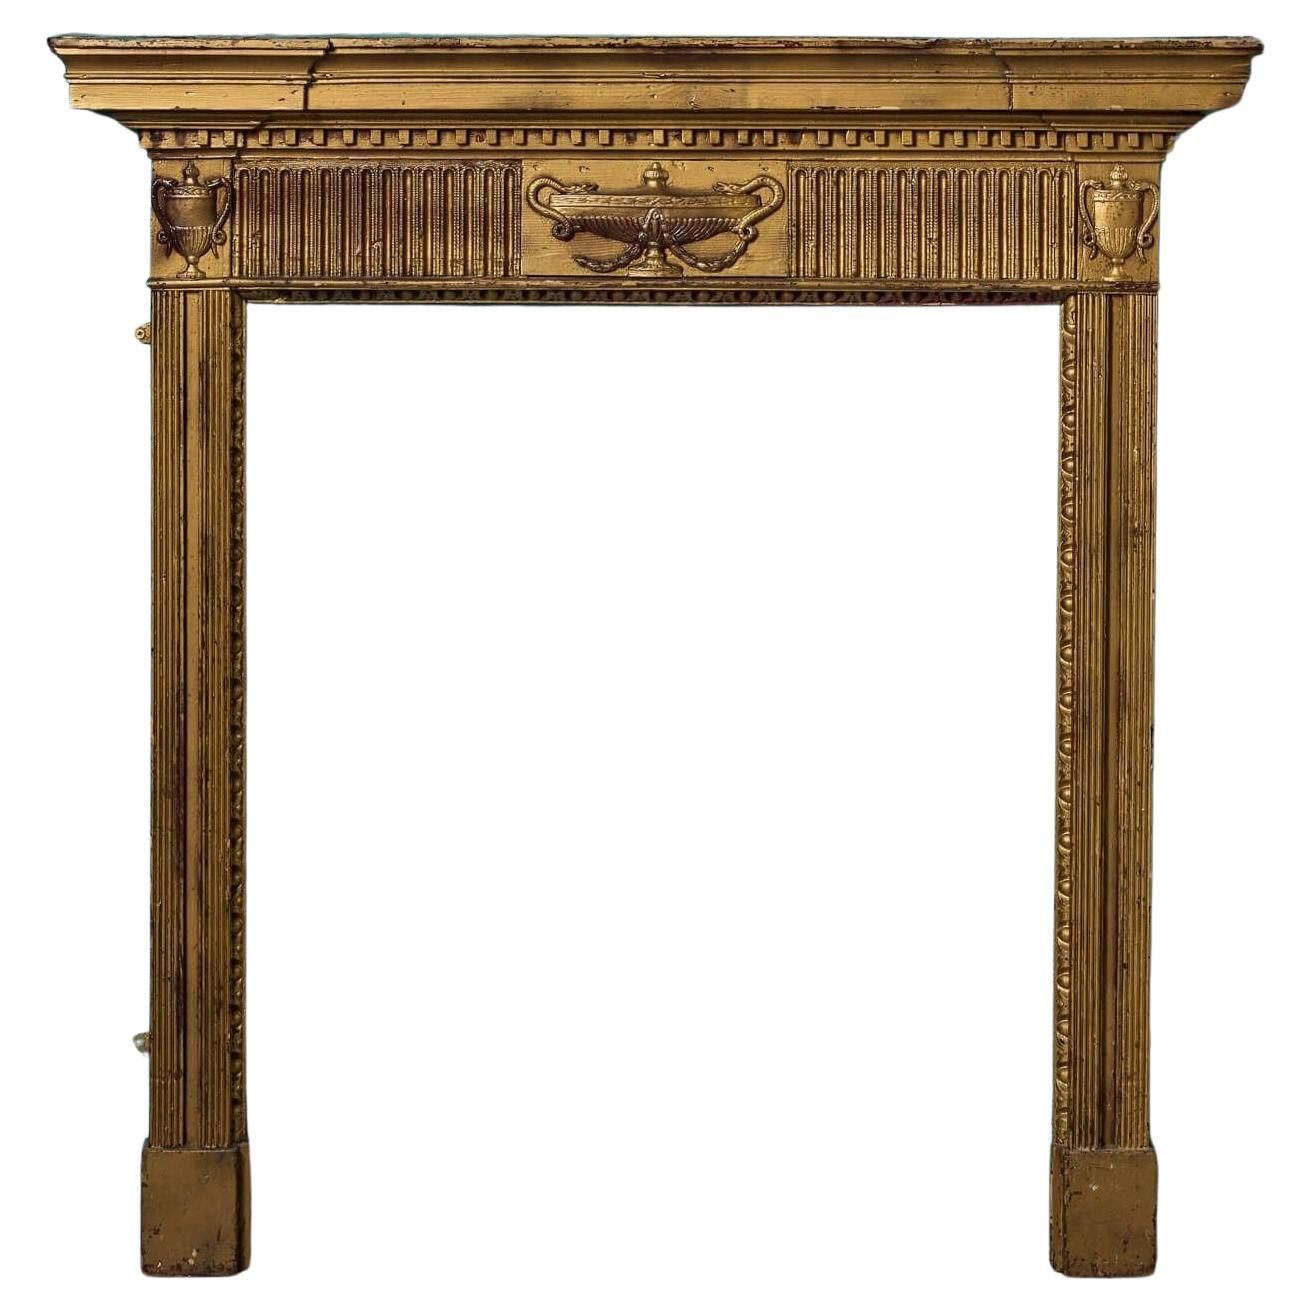 Painted Neoclassical Style Antique Georgian Fire Mantel